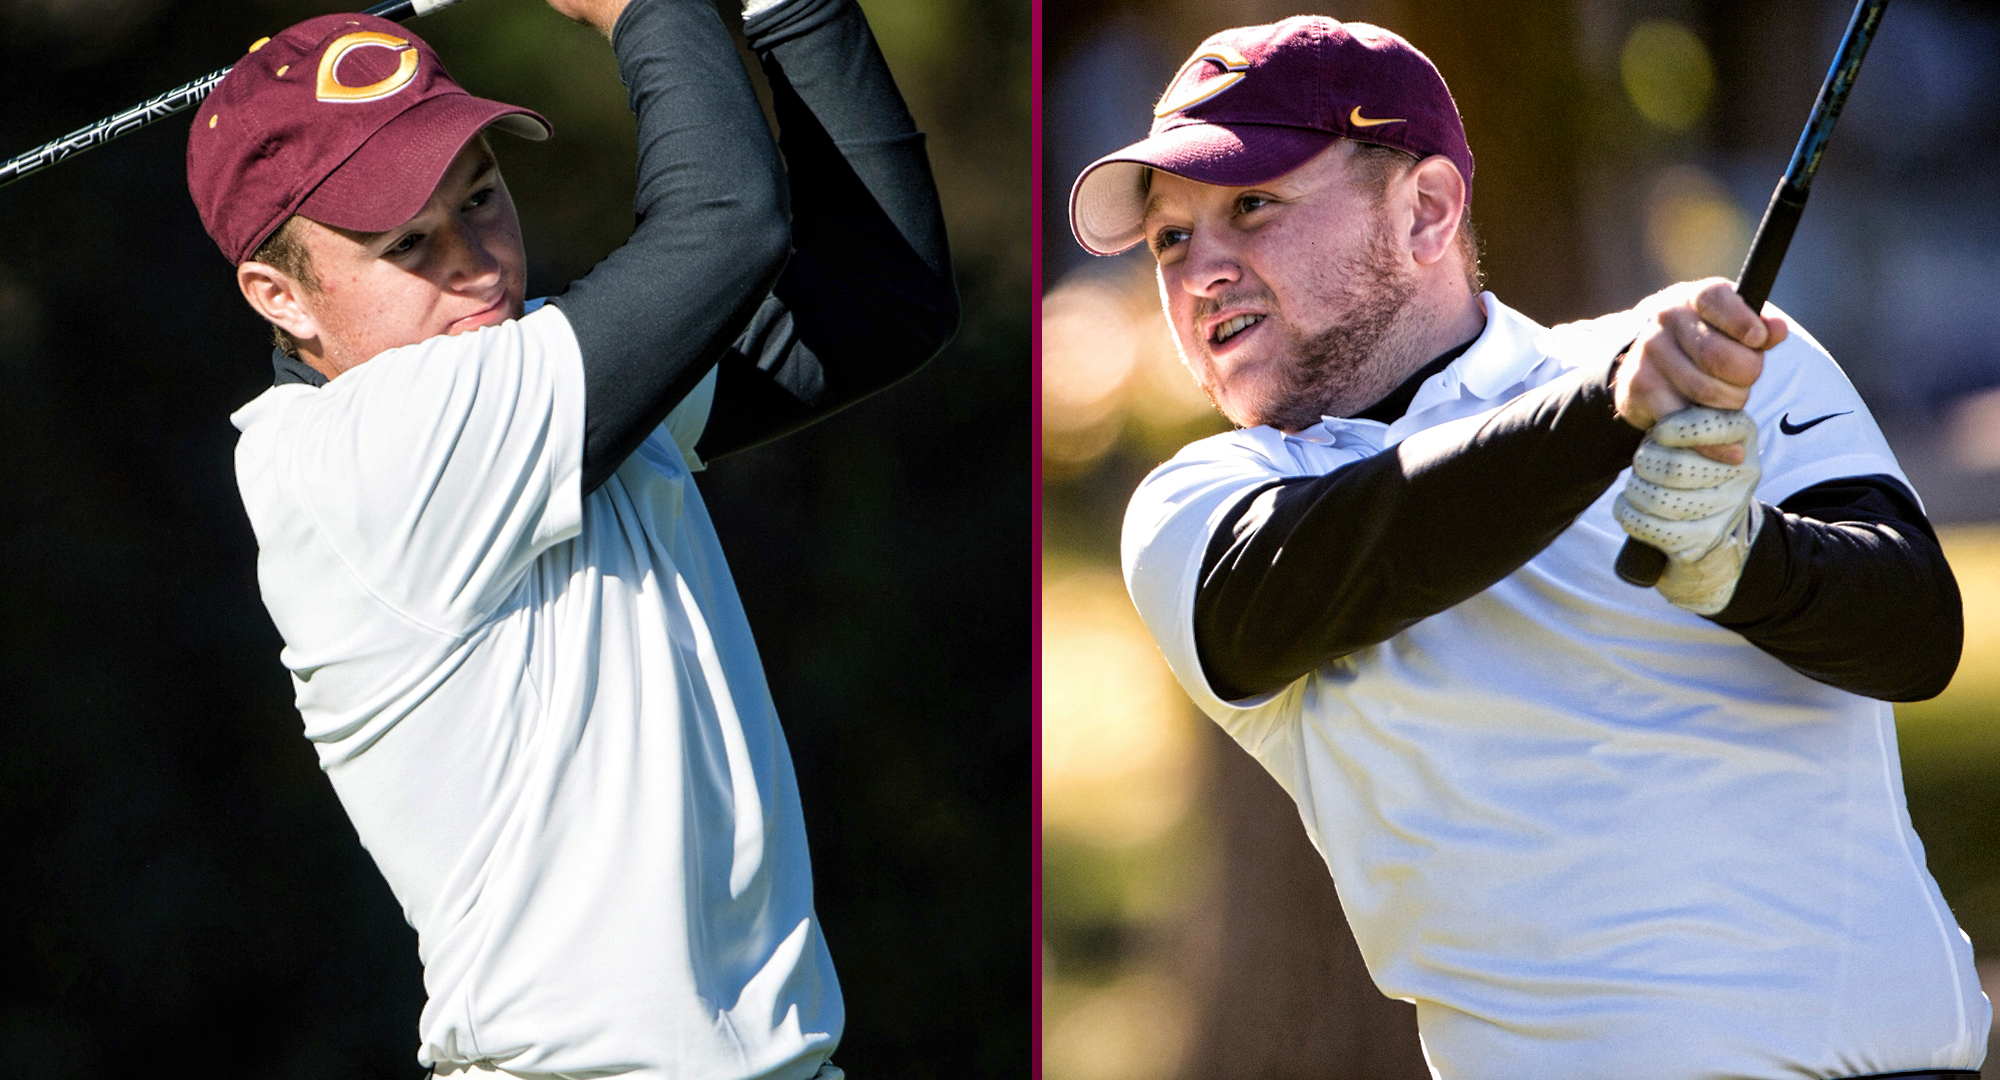 Blake Kahlbaugh (L) and Nathaniel Kahlbaugh both shot a two-day total 154 to lead the Cobbers at the St. John's Fall Invite.